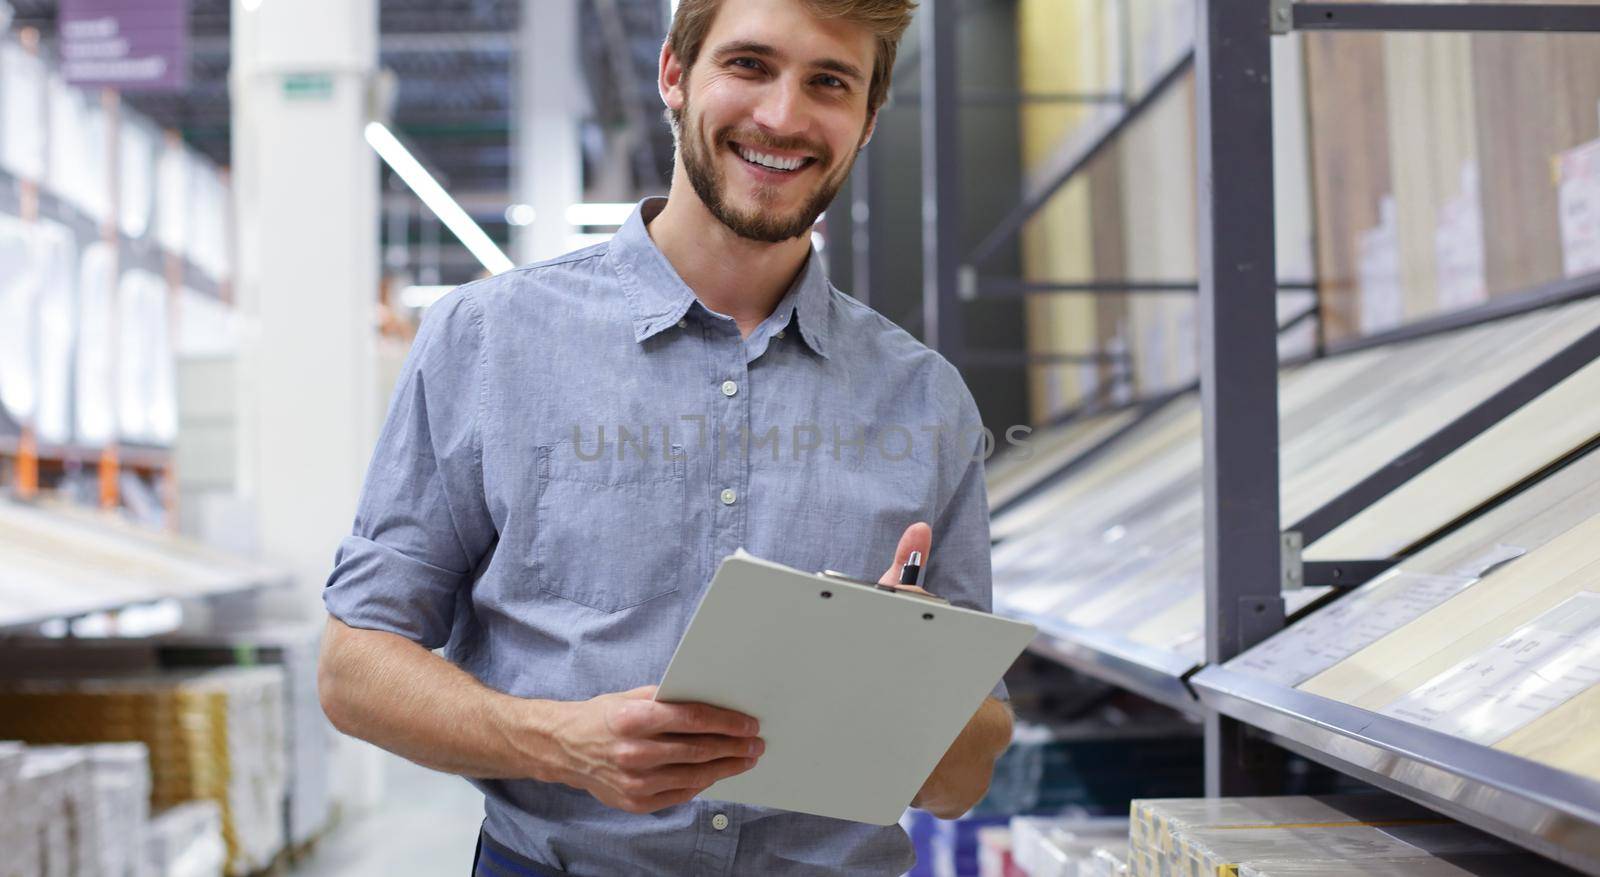 Manager use his tablet for online checking products available